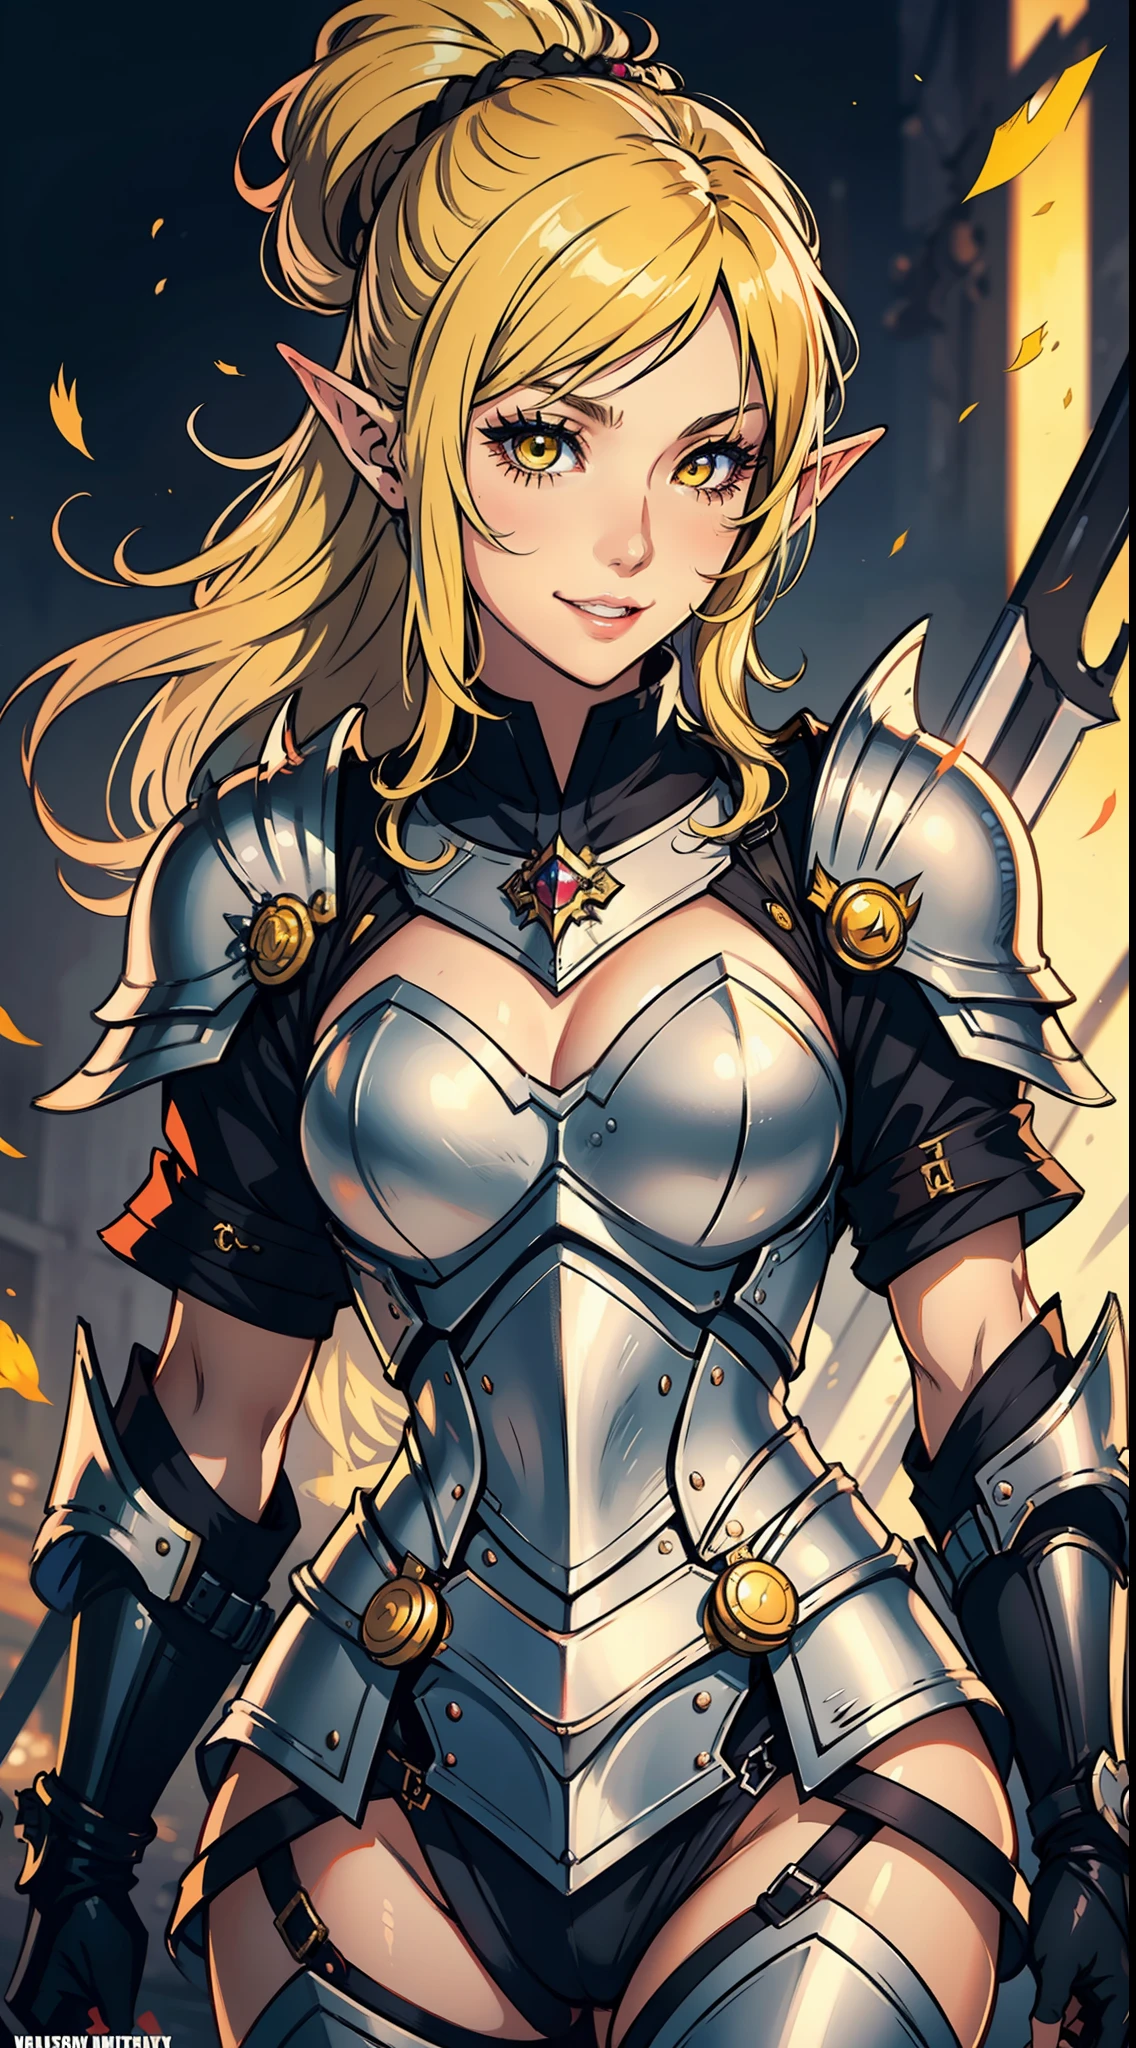 elven knight, messy bun, black eyeliner, mascara, natural lips, looking at viewer, grin, mouth closed, blonde hair, yellow eyes, sexy anime face, highly detailed, perfect face, shiny skin, shiny hair, wearing plate armor,fantasy armor, sword in left hand, full body